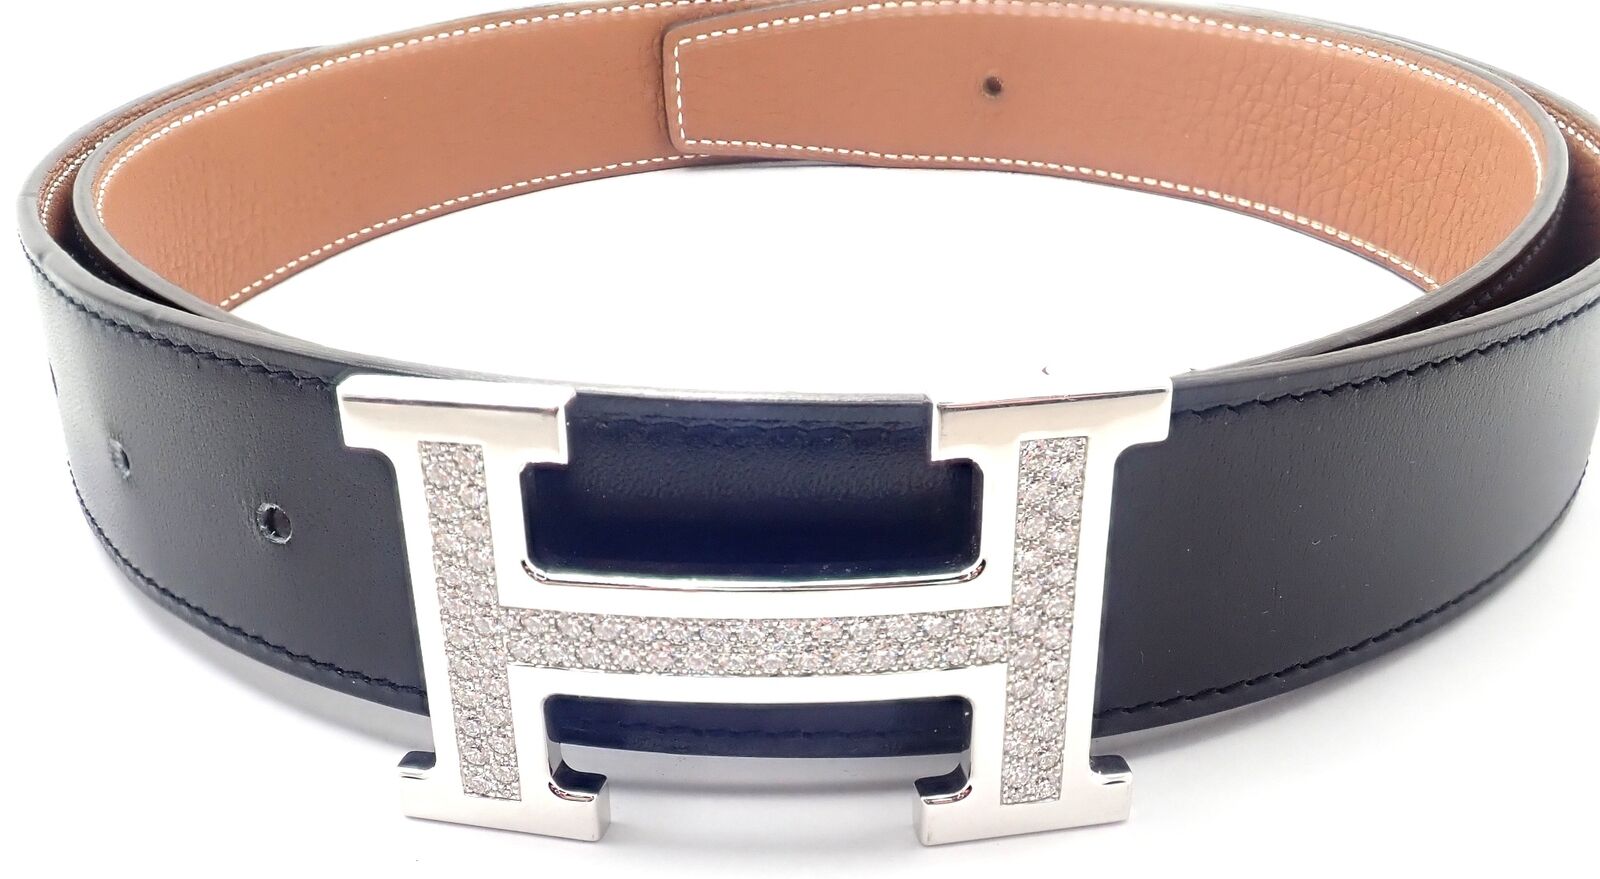 Authentic! Hermes 18k White Gold 3.79ct Diamond Large H Buckle